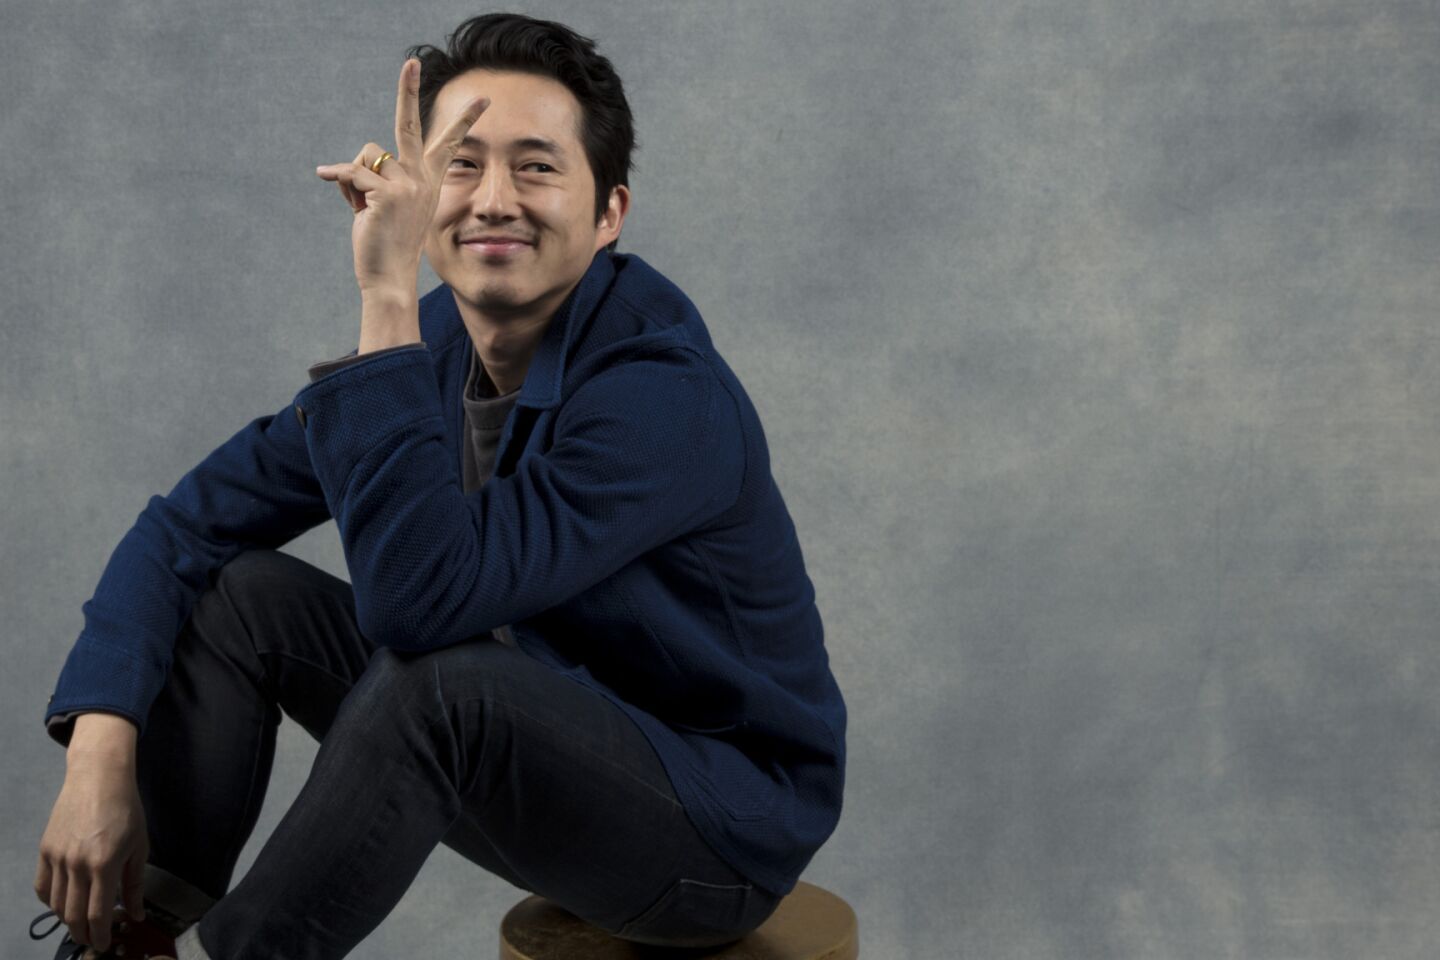 Actor Steven Yeun, from the film "Sorry to Bother You‚" photographed in the L.A. Times studio during the Sundance Film Festival in Park City, Utah, Jan. 20, 2018.